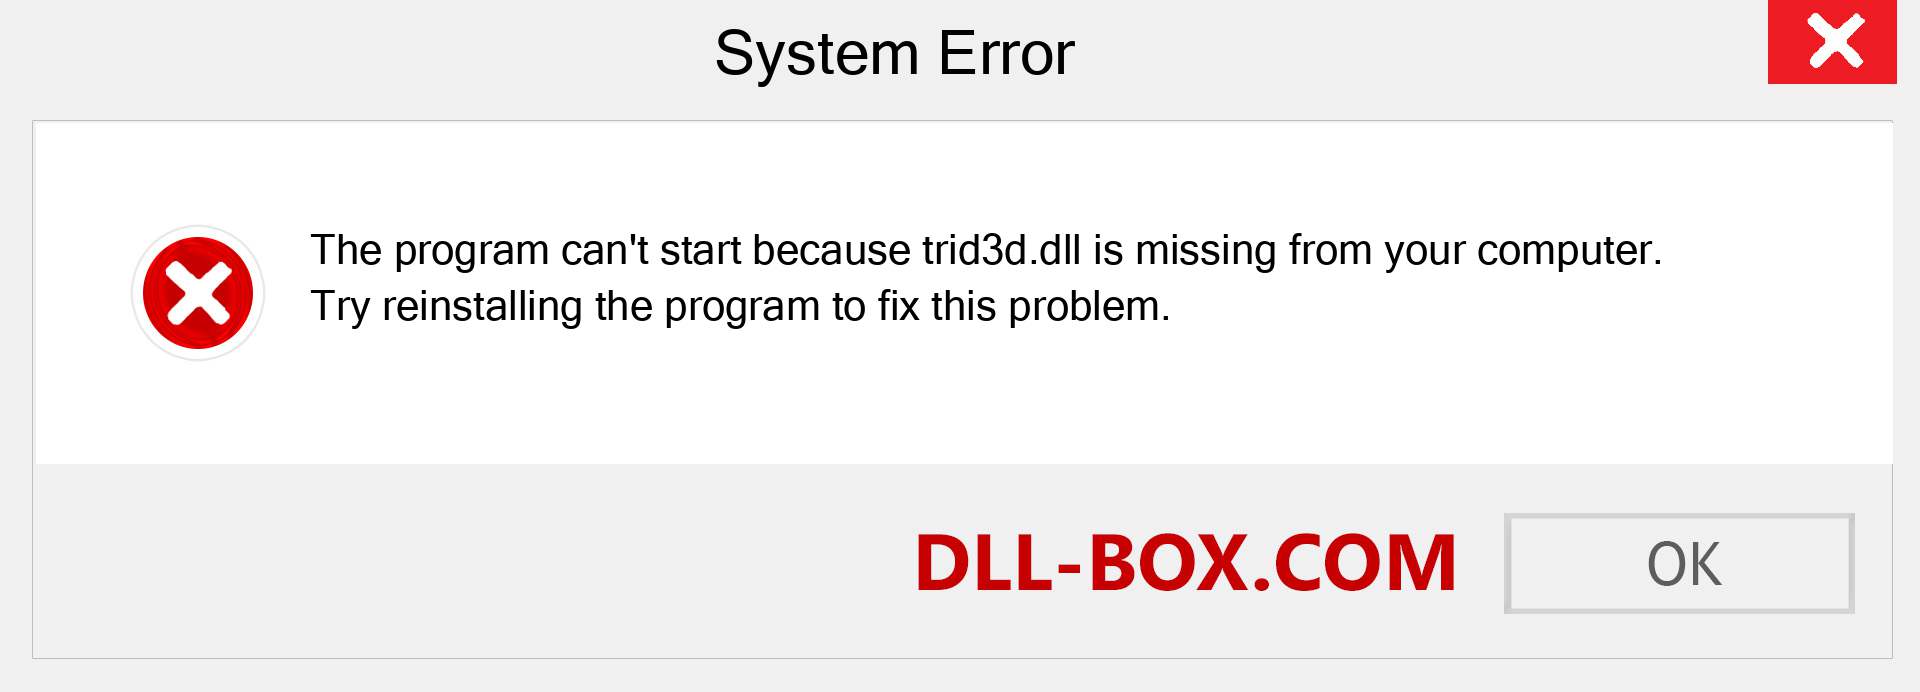  trid3d.dll file is missing?. Download for Windows 7, 8, 10 - Fix  trid3d dll Missing Error on Windows, photos, images